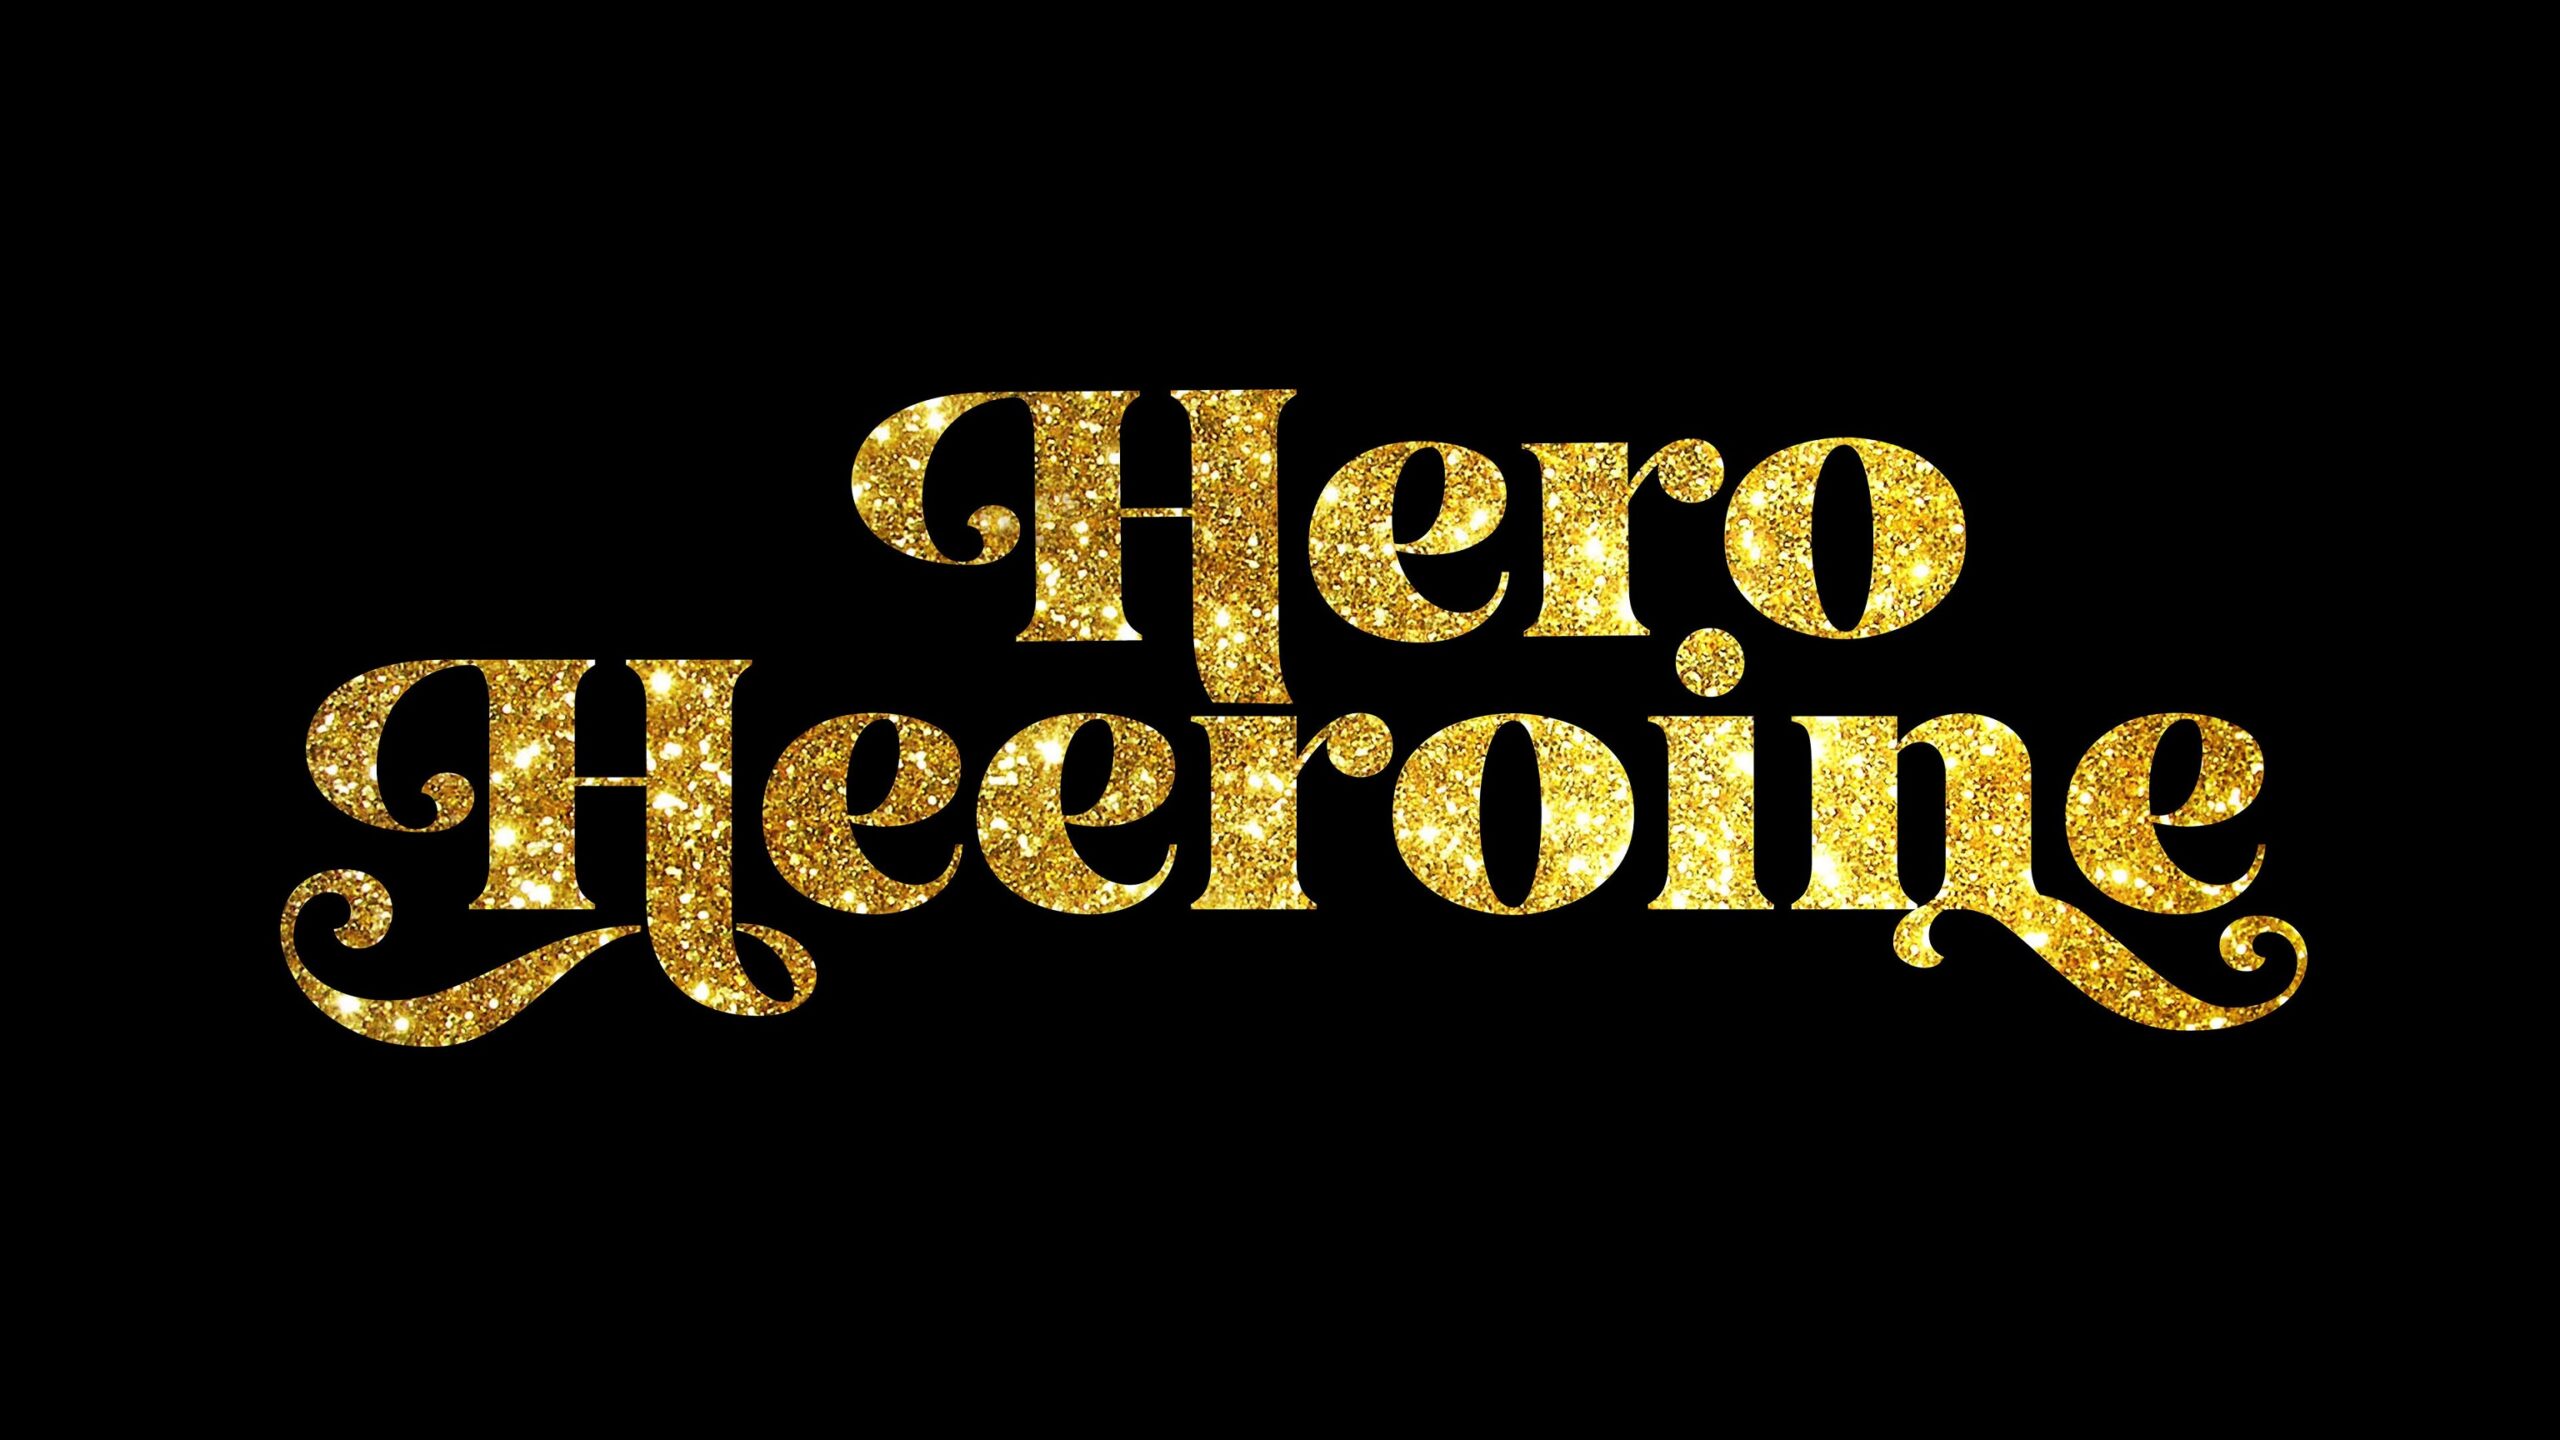 Speculations soar high as a BIG superstar is to join the cast of Producer Prerna Arora’s Hero Heeroine